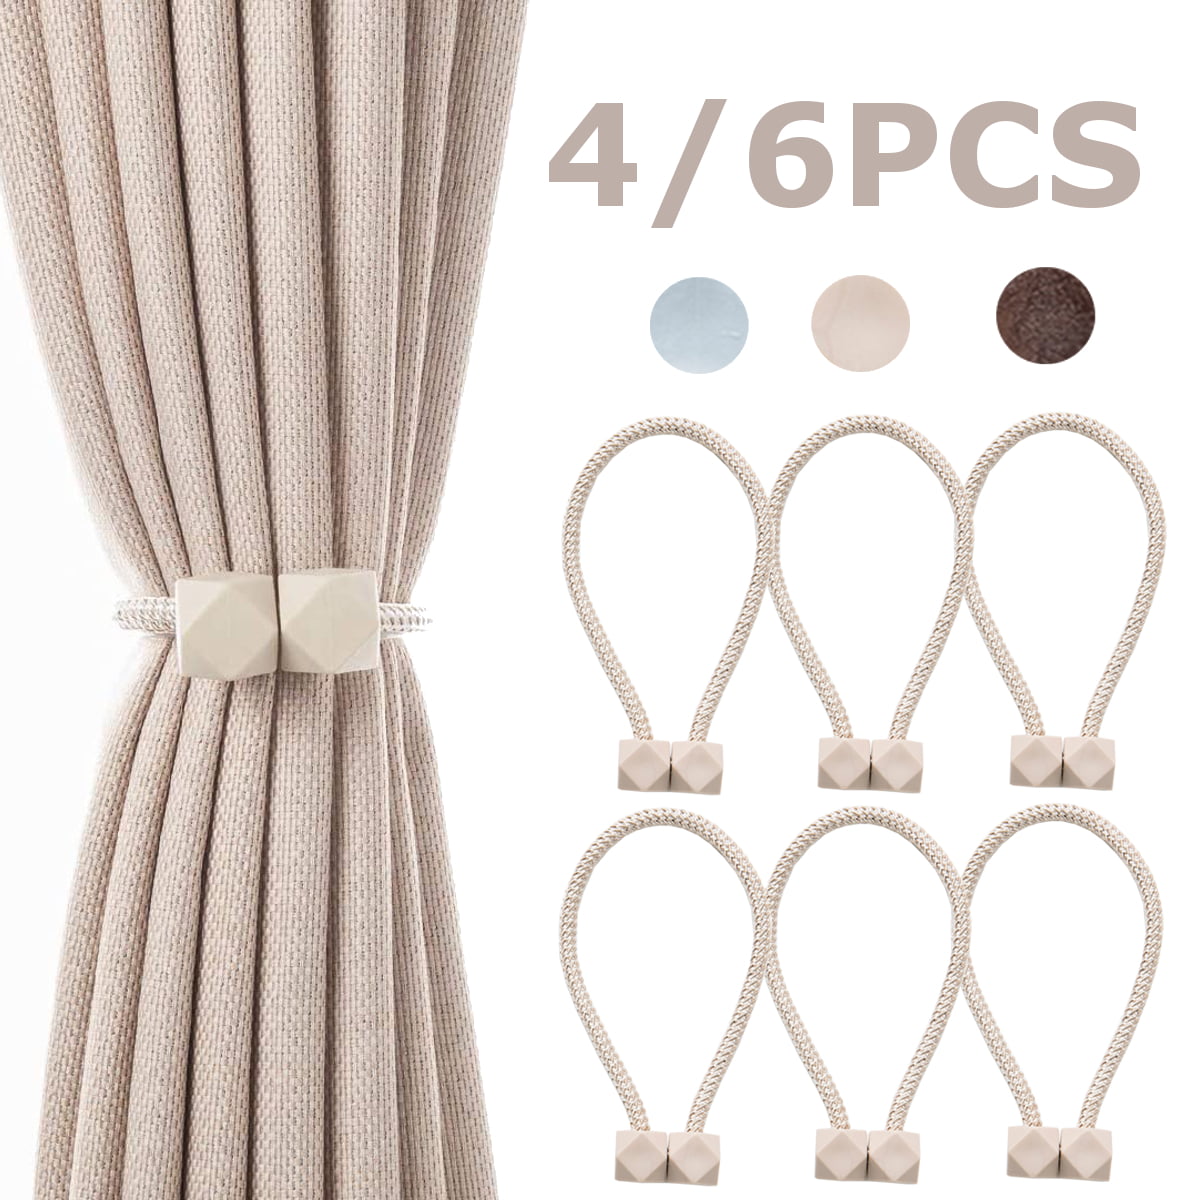 2/4/6PCS Magnetic Curtain Tie Backs Clips Ball Buckle Holder Home Window Decor 